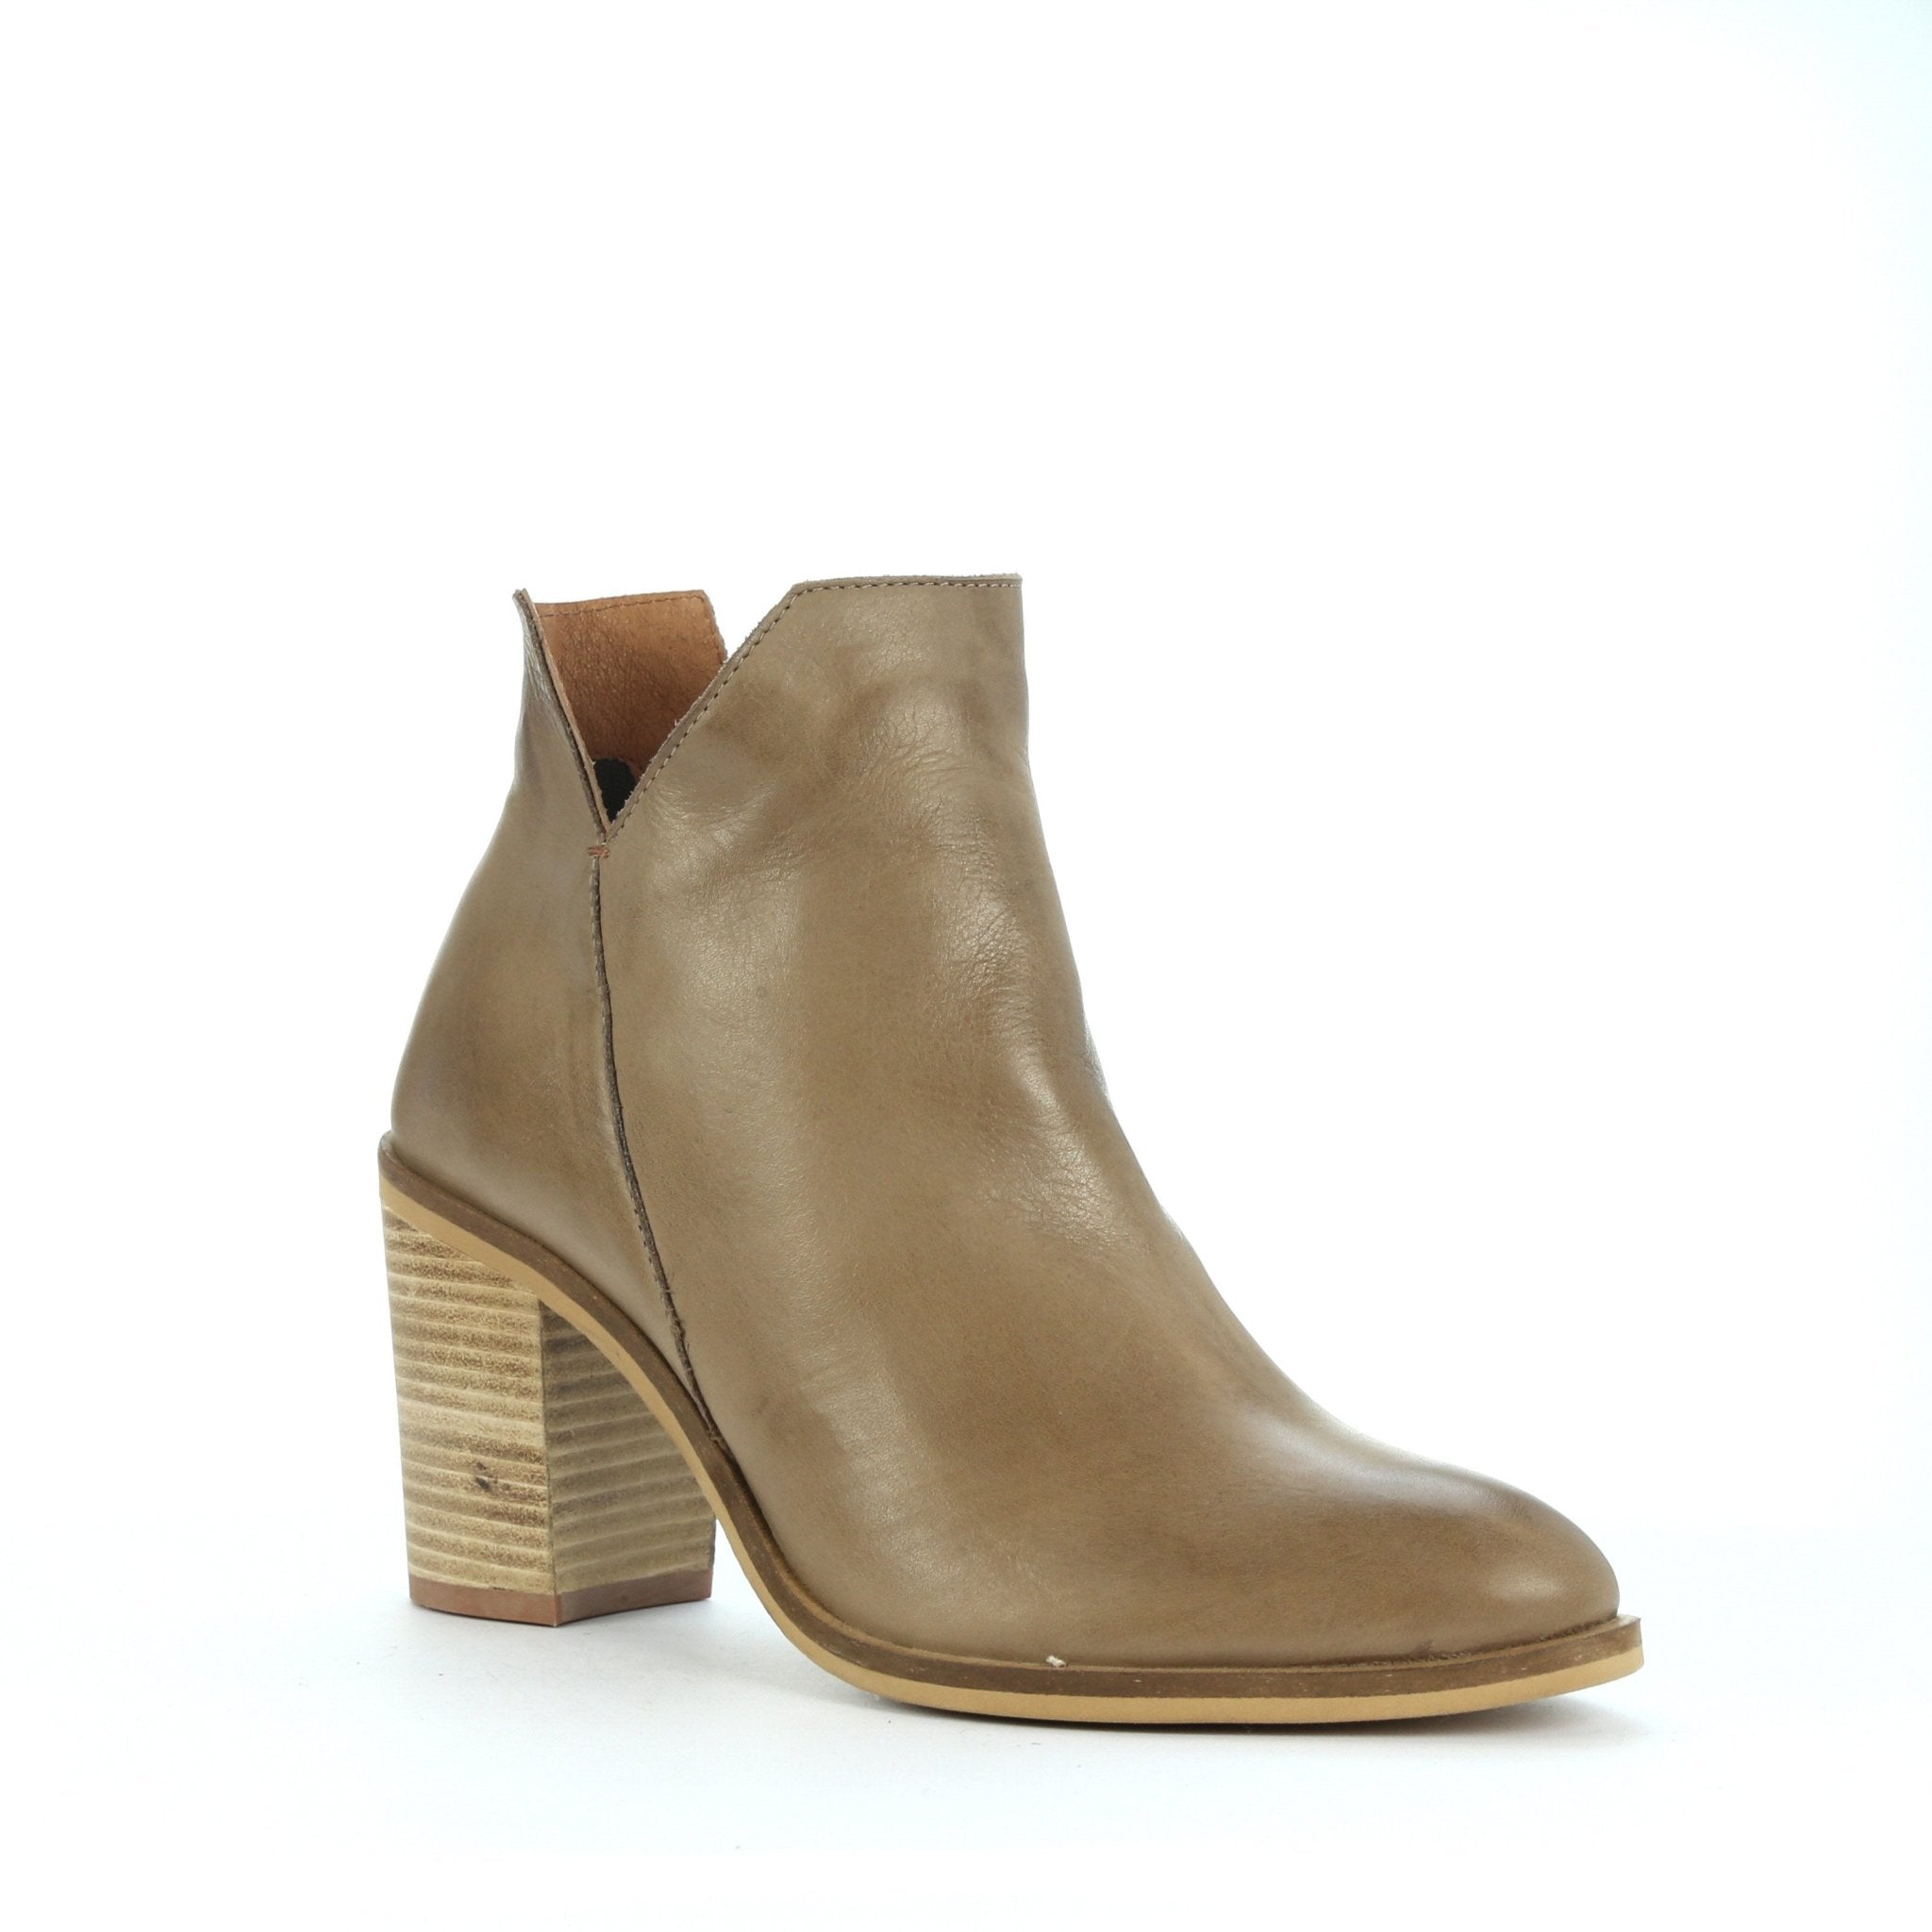 NOORT - EOS Footwear - Ankle Boots #color_Taupe